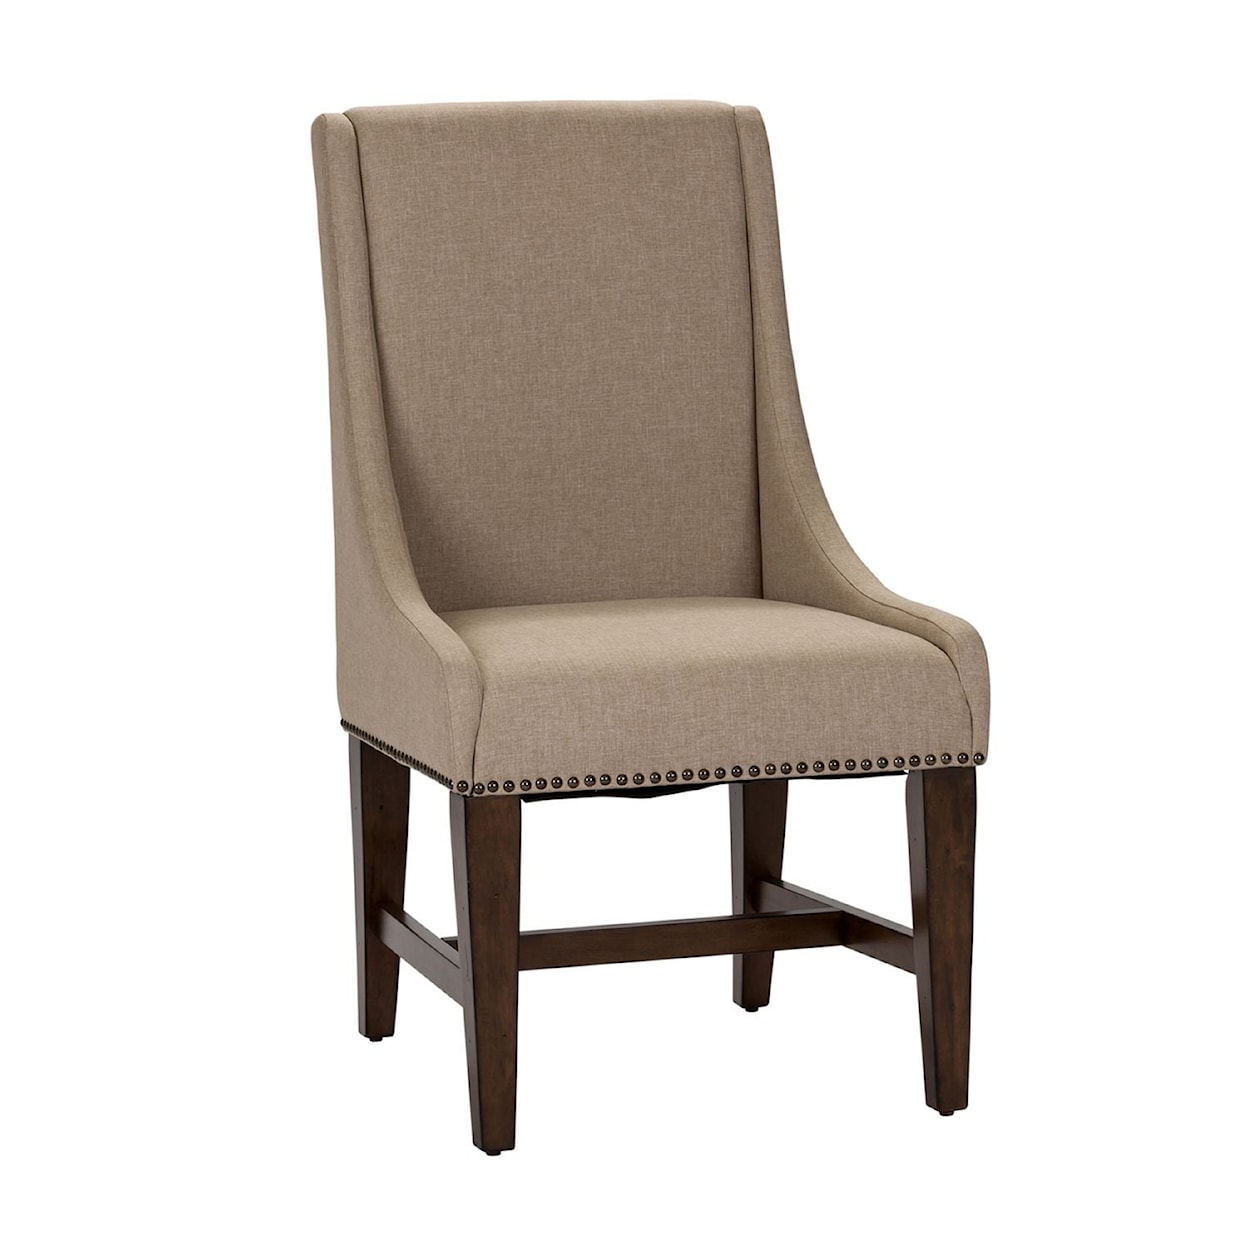 Libby Armand Upholstered Side Chair